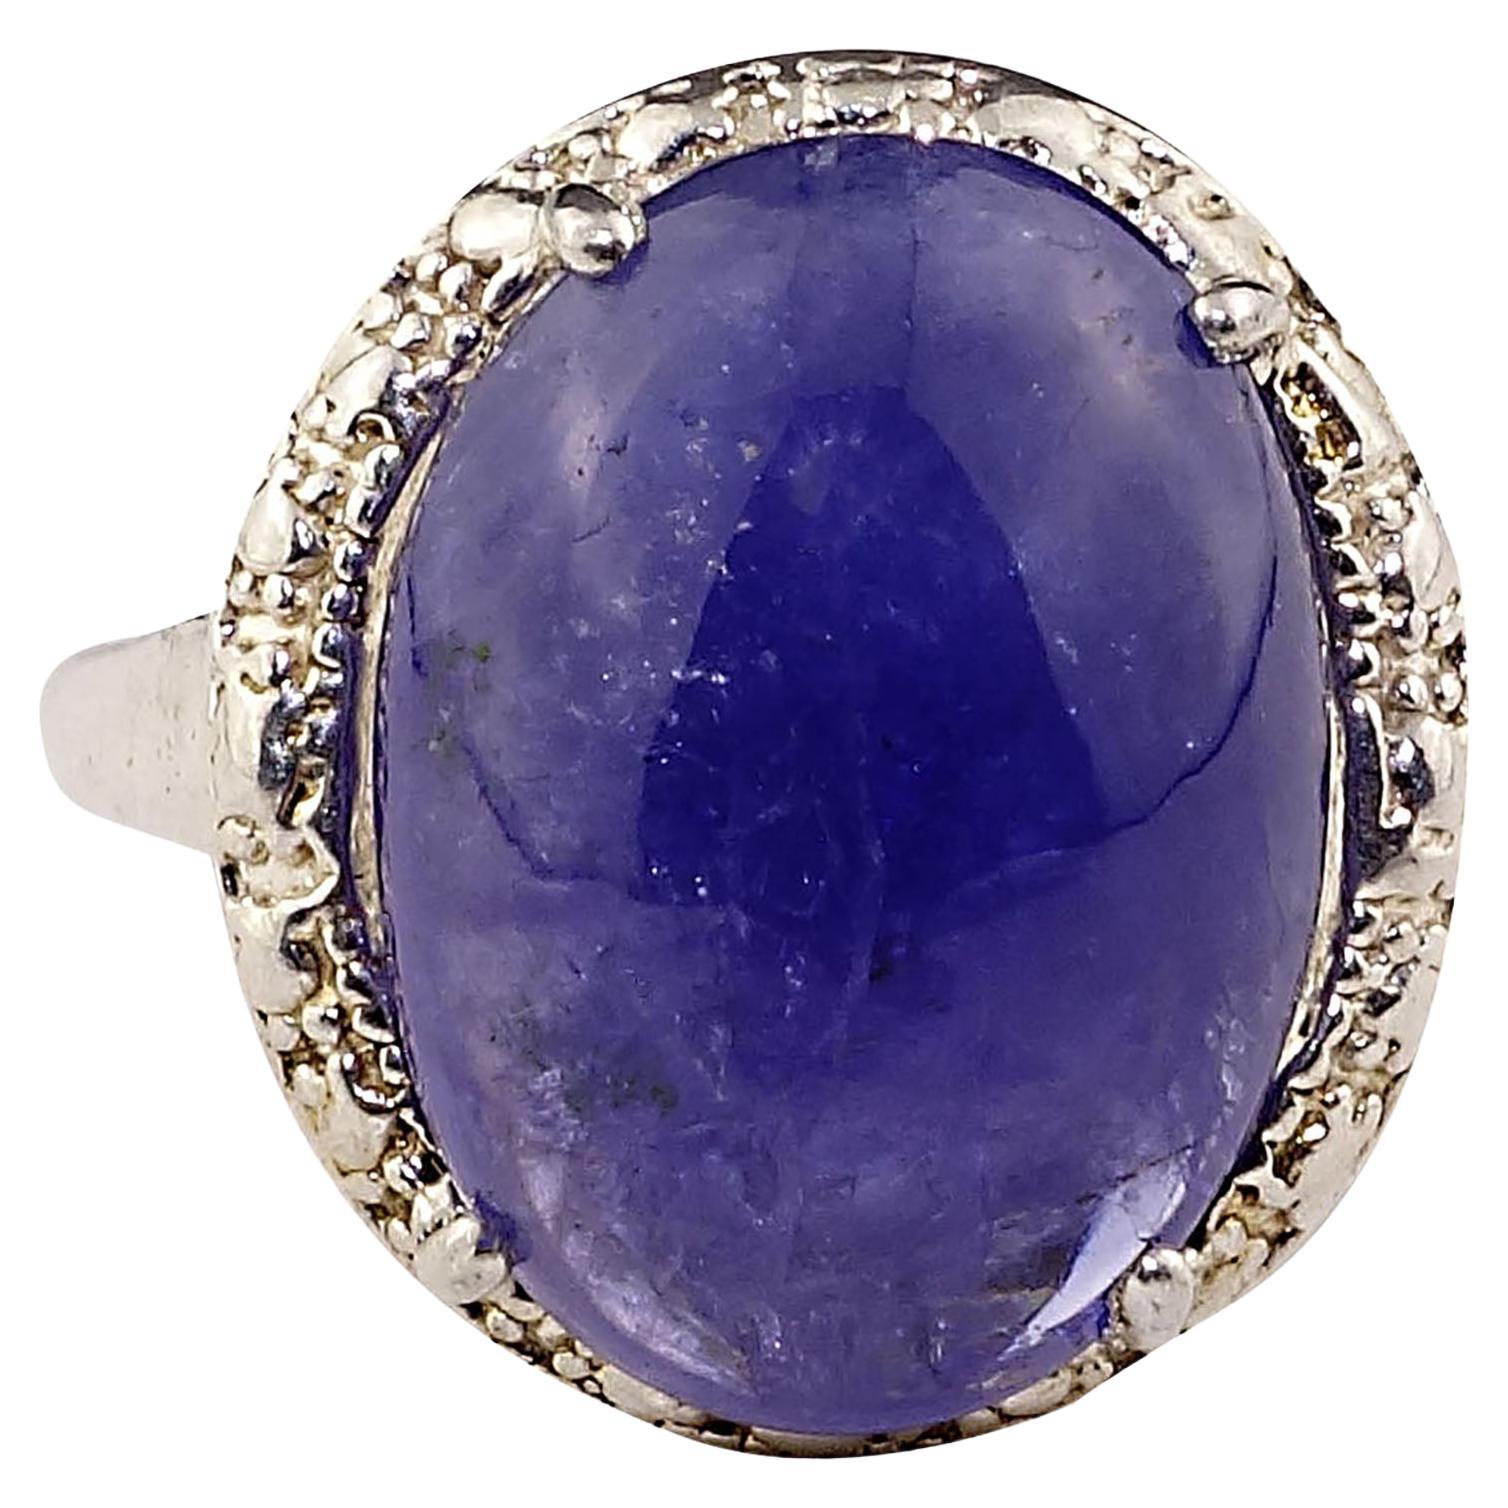 AJD Gorgeous Oval Tanzanite Cabochon in Sterling Silver Ring